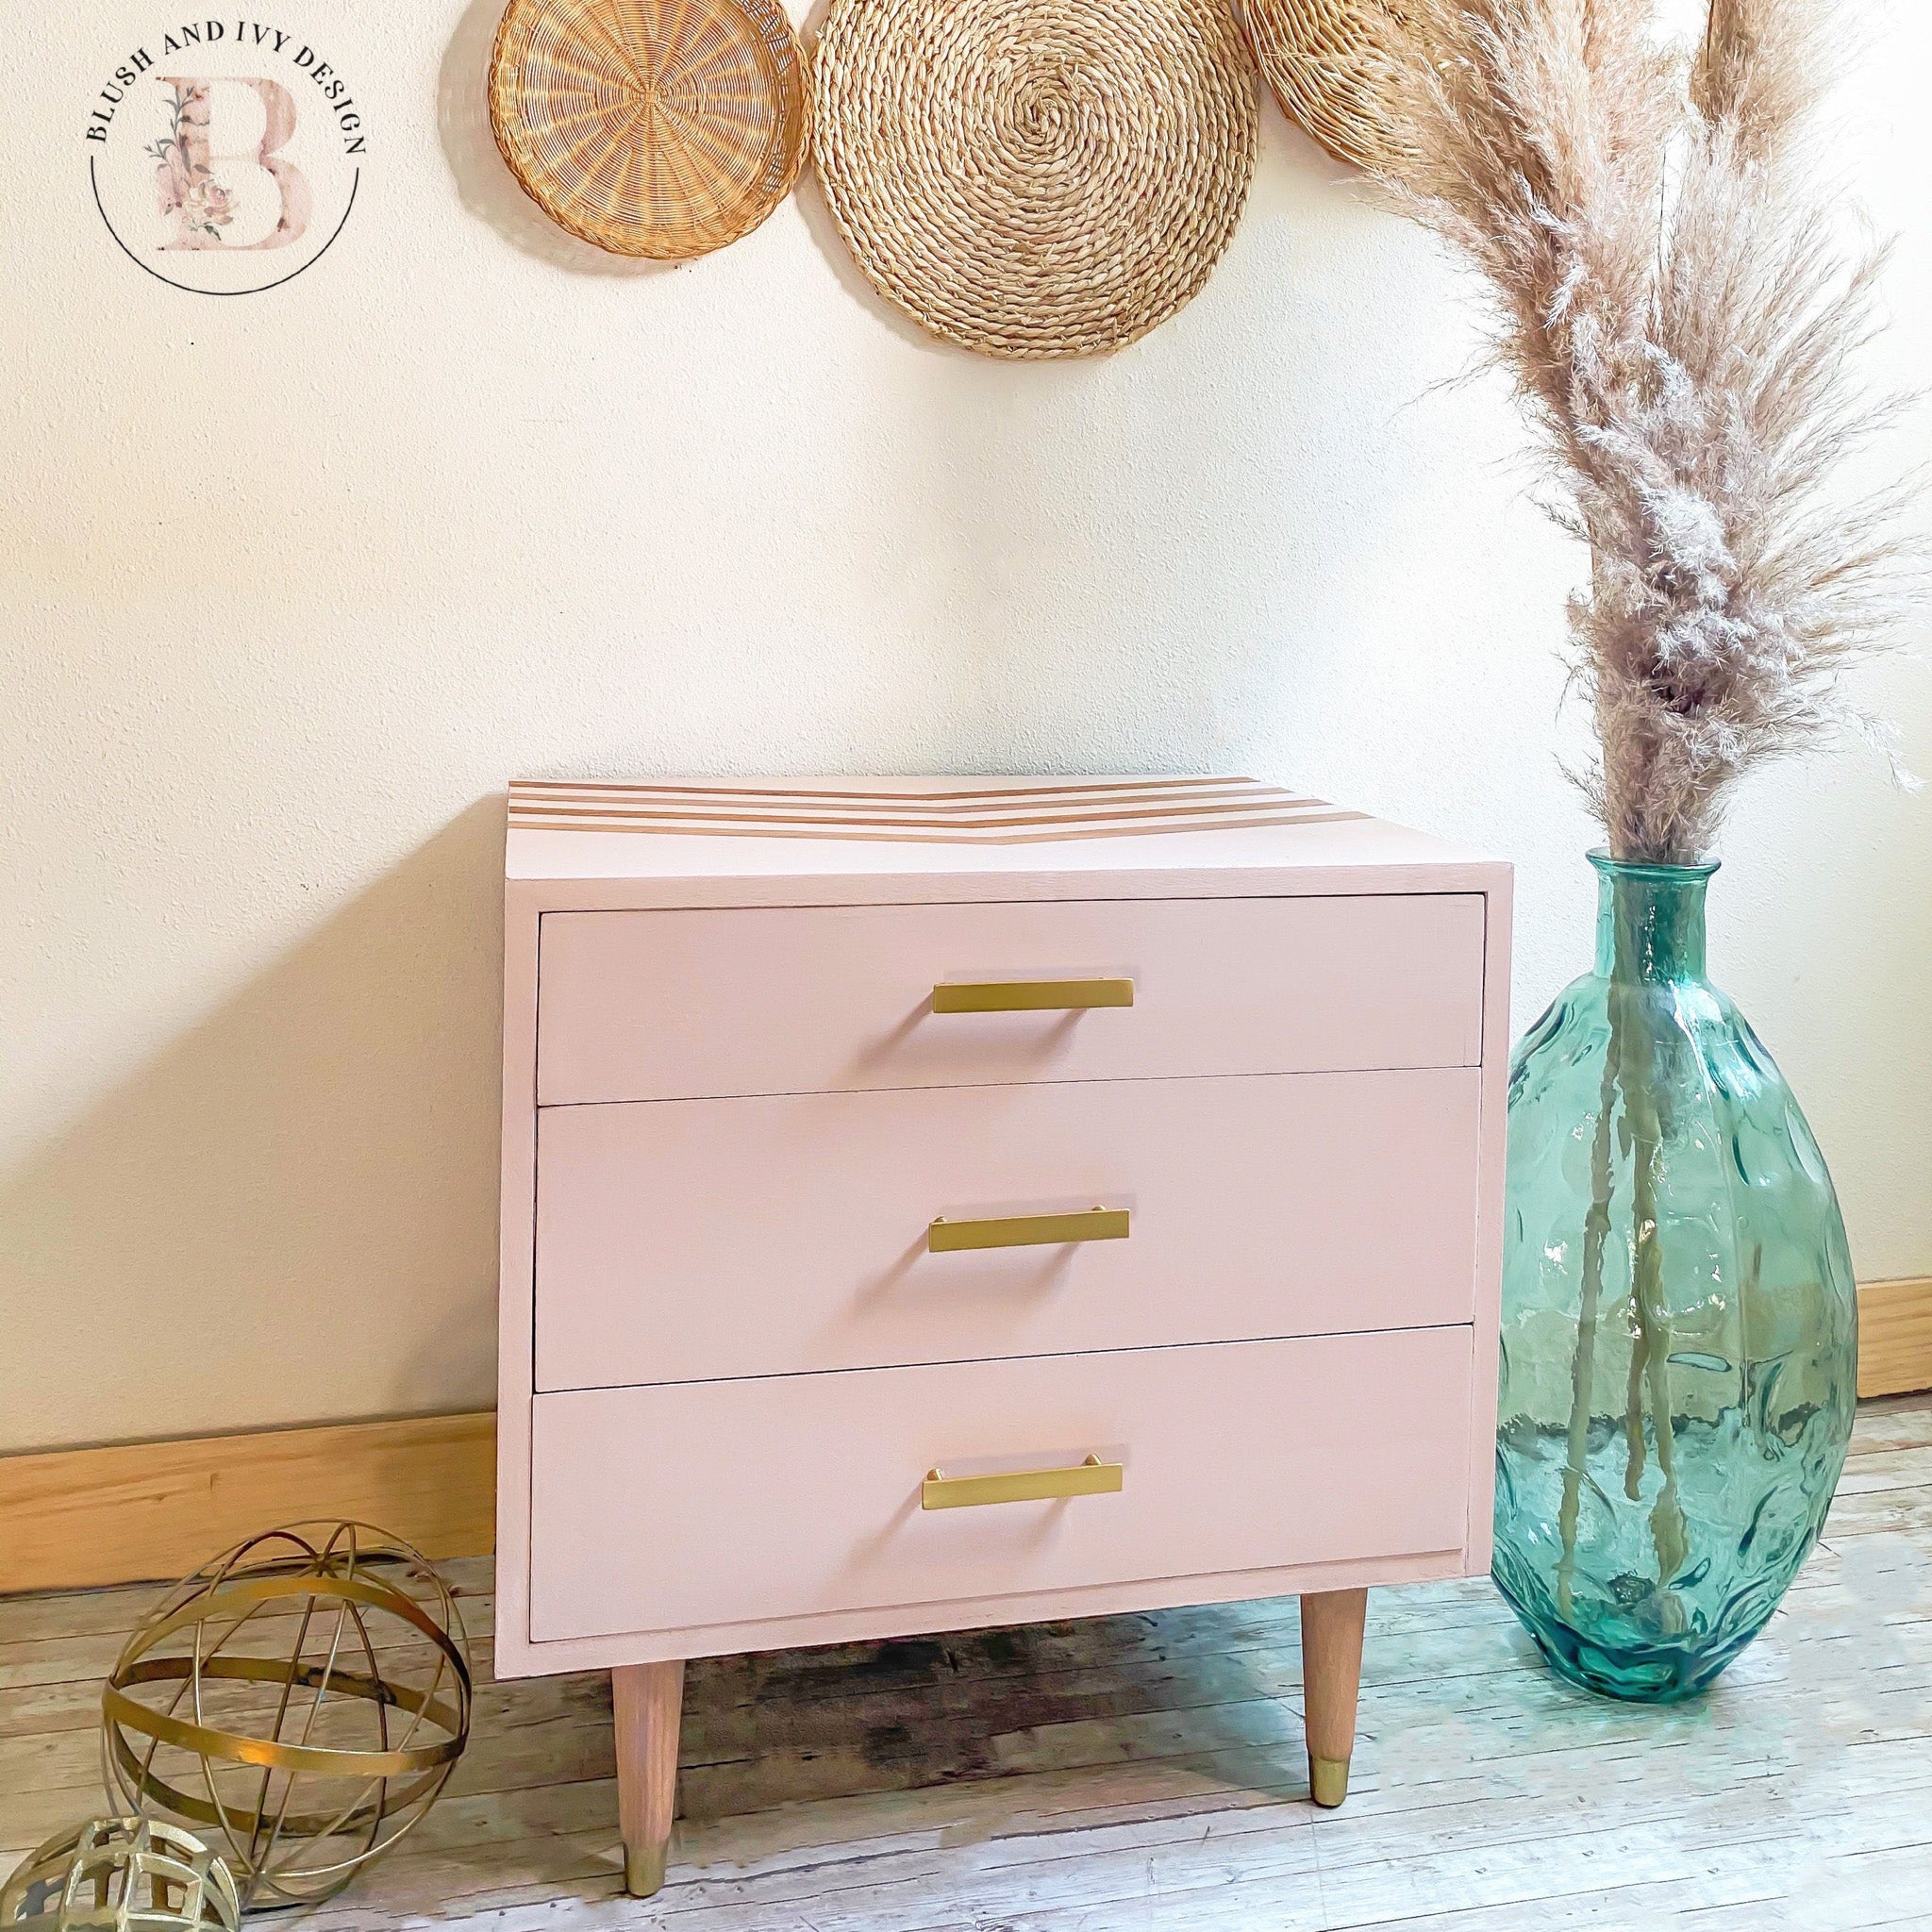 A mid-century 3-drawer nightstand refurbished by Blush and Ivy Design ispainted in Dixie Belle's Tea Rose chalk mineral paint.